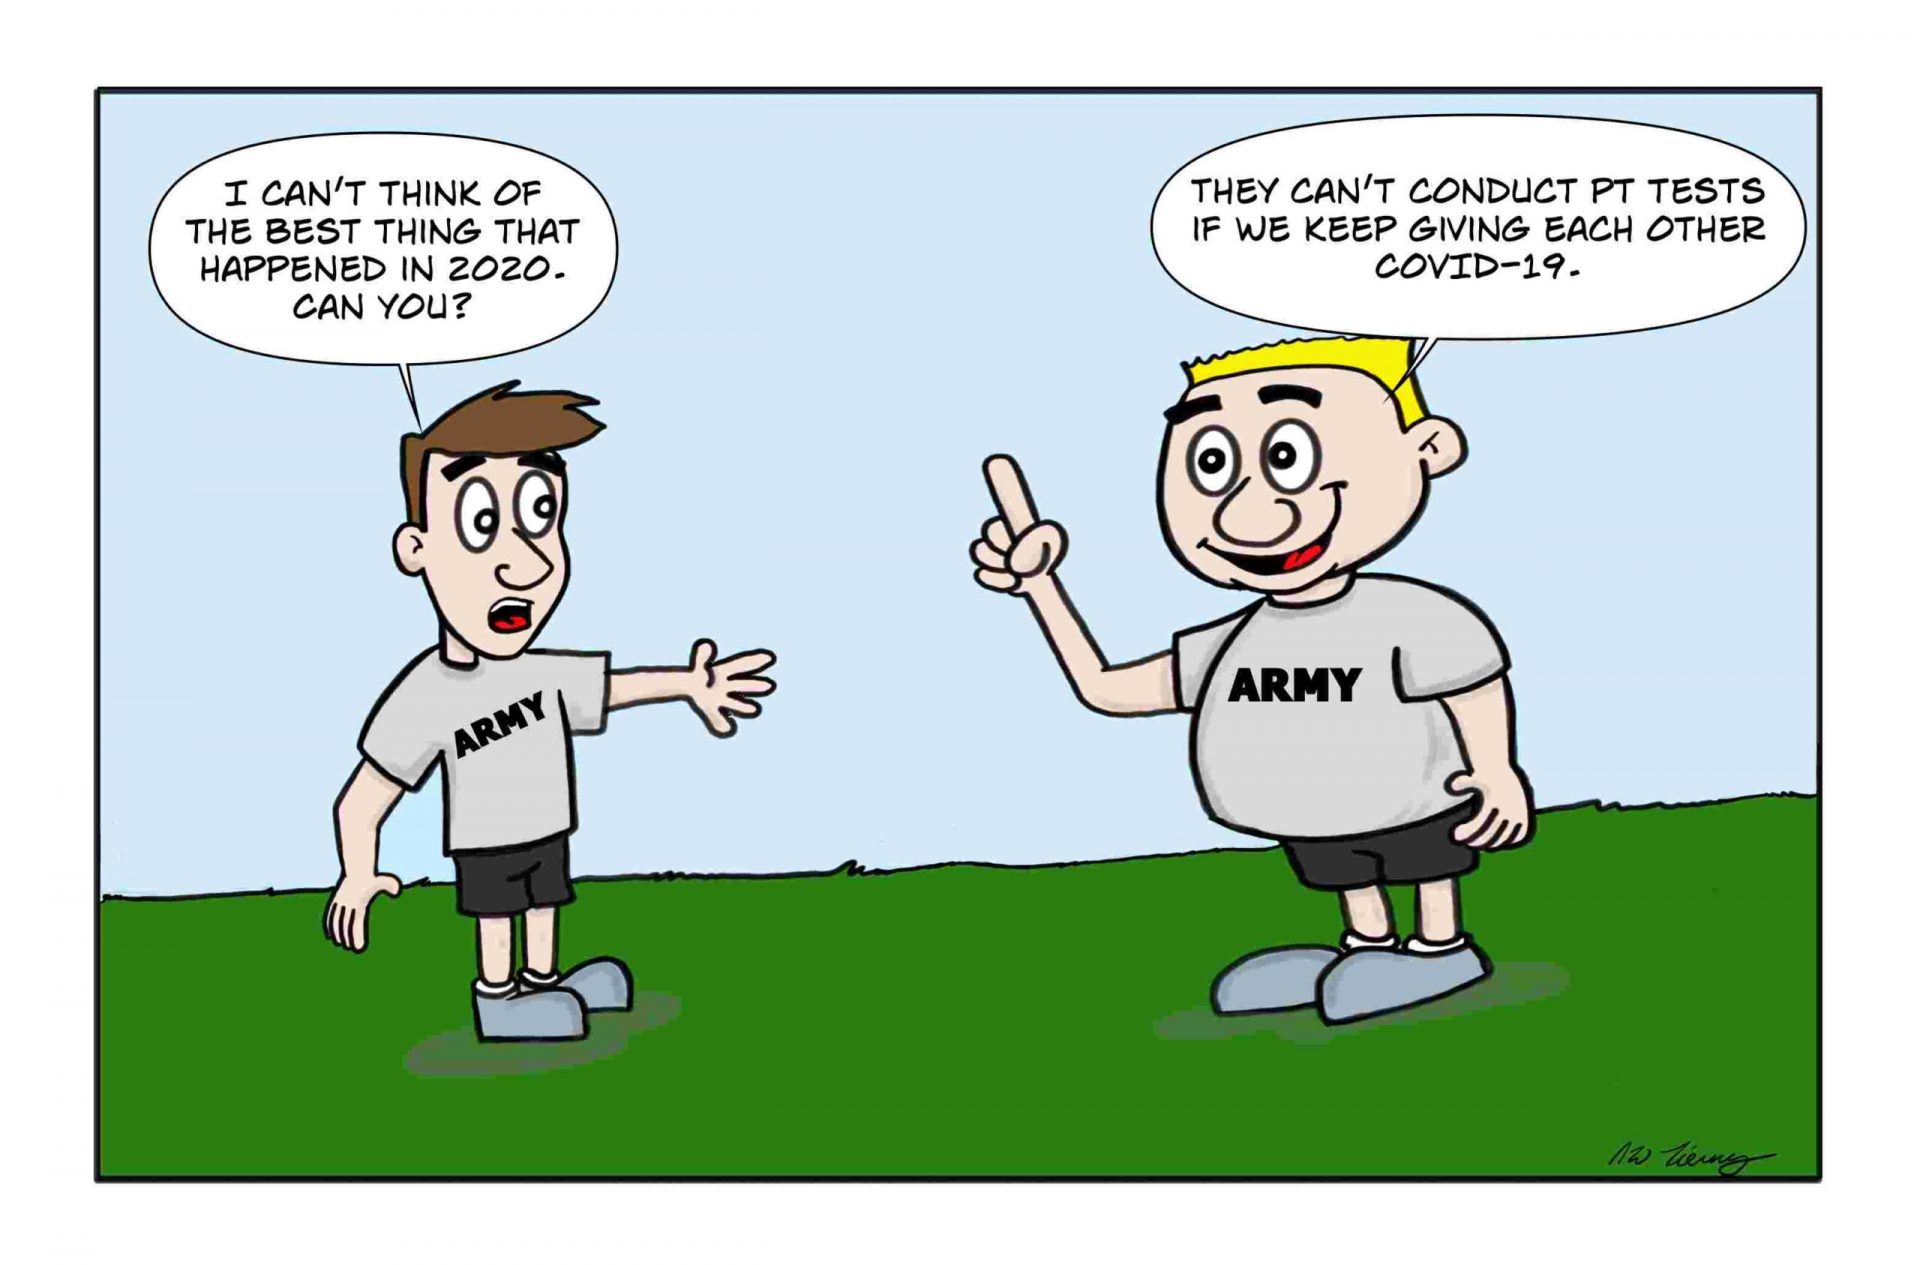 The Army no longer conducts PT (physical training) tests as a result of COVID-19.